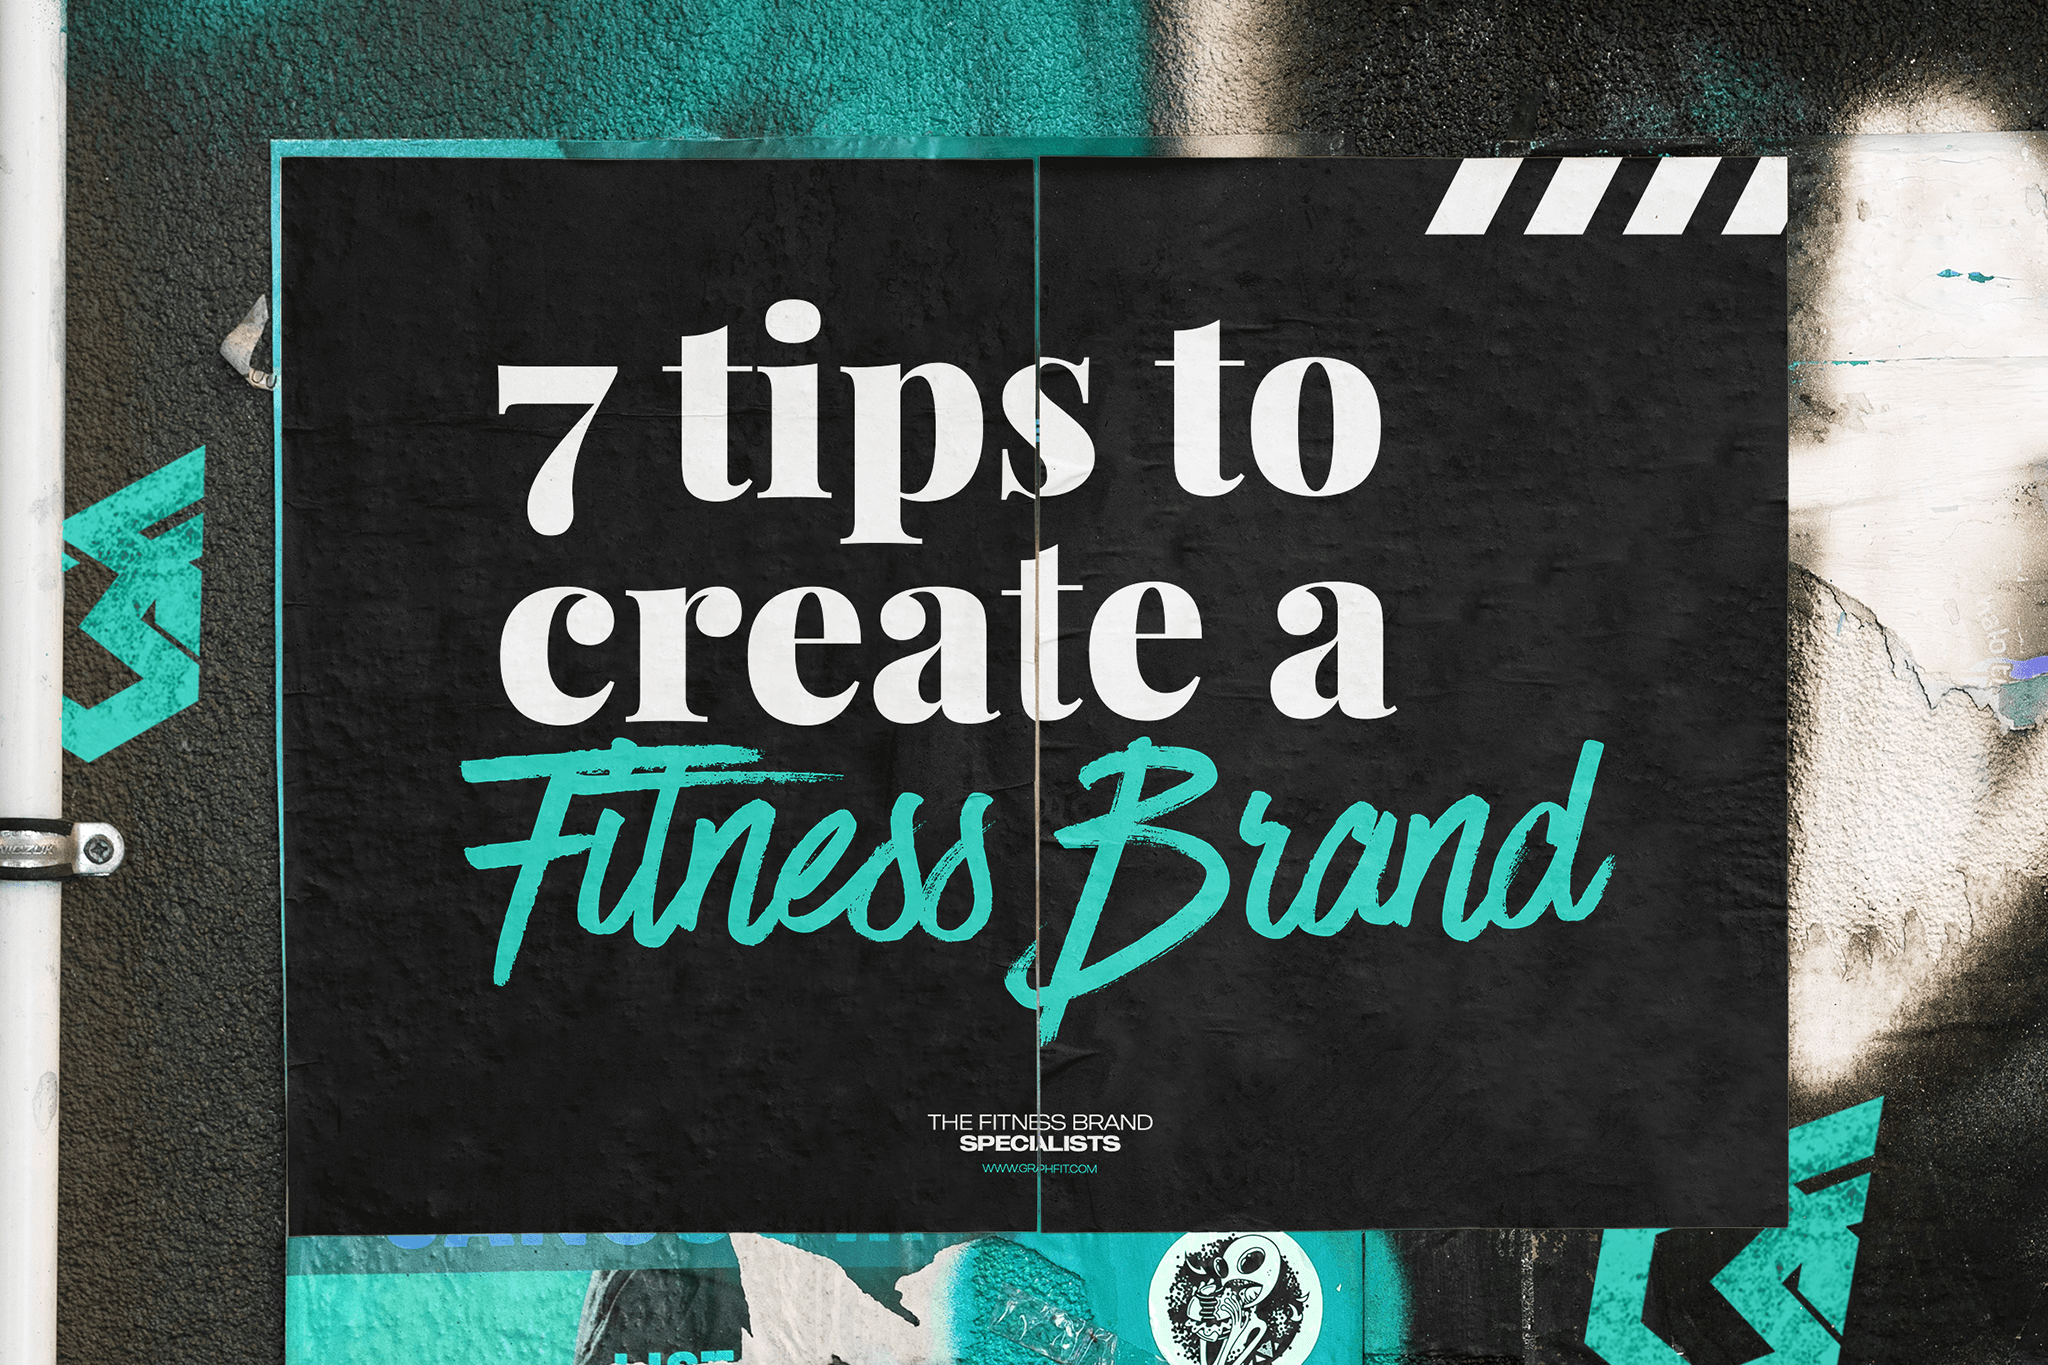 7 tips to create a fitness brand